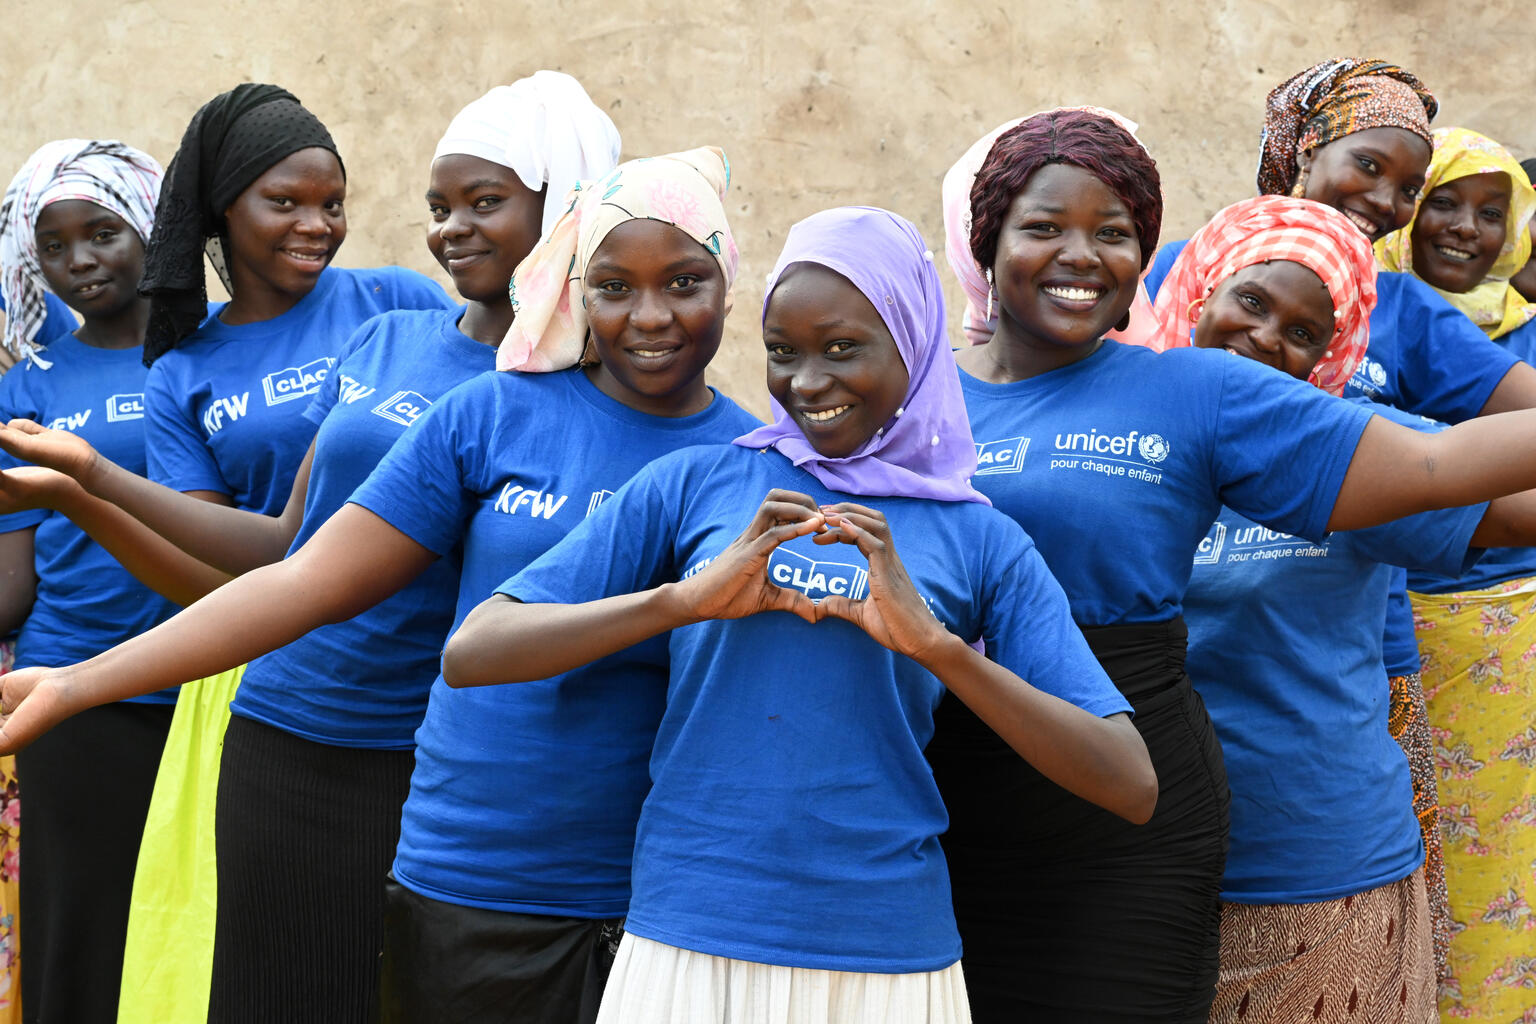 Young women organizing a meeting to discuss HIV/AIDS